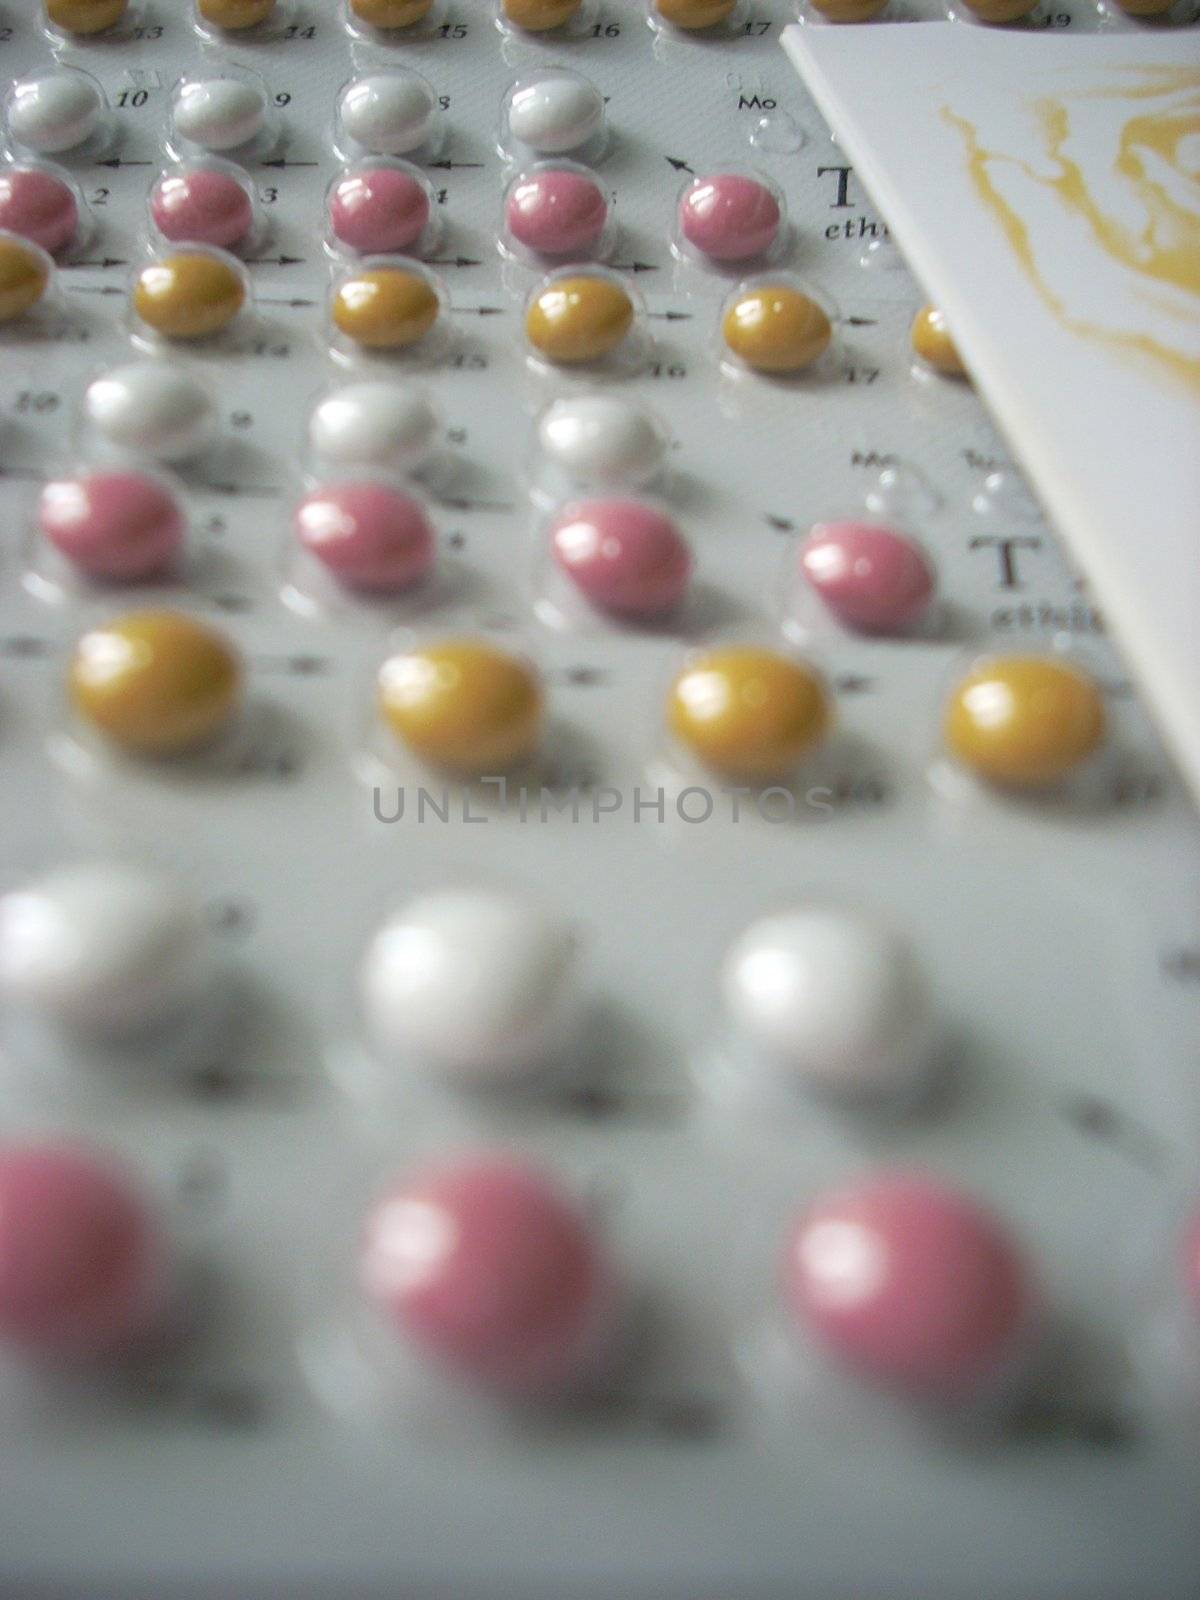 Contraceptive pill by DOODNICK